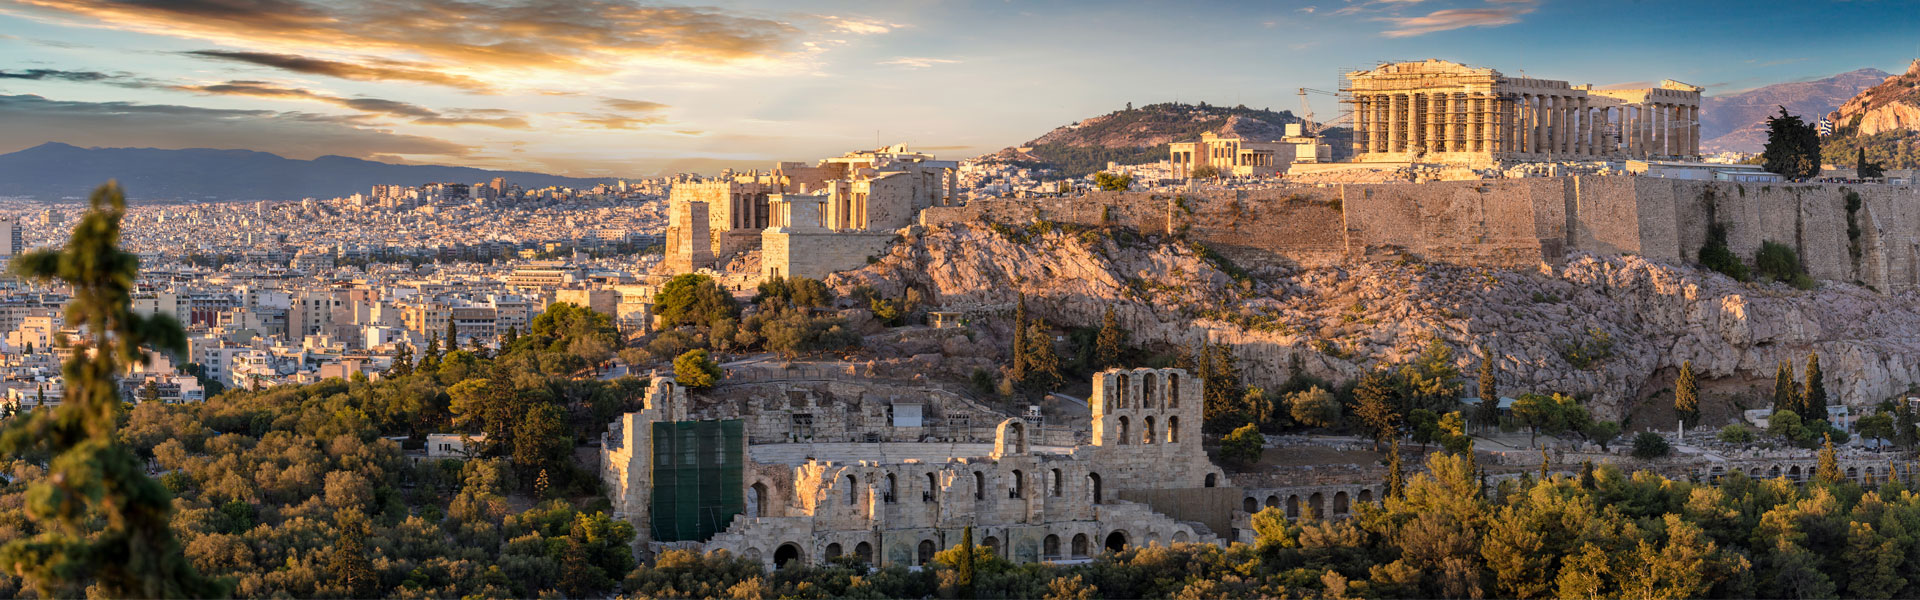 Panoramic view of the Acropolis in Athens